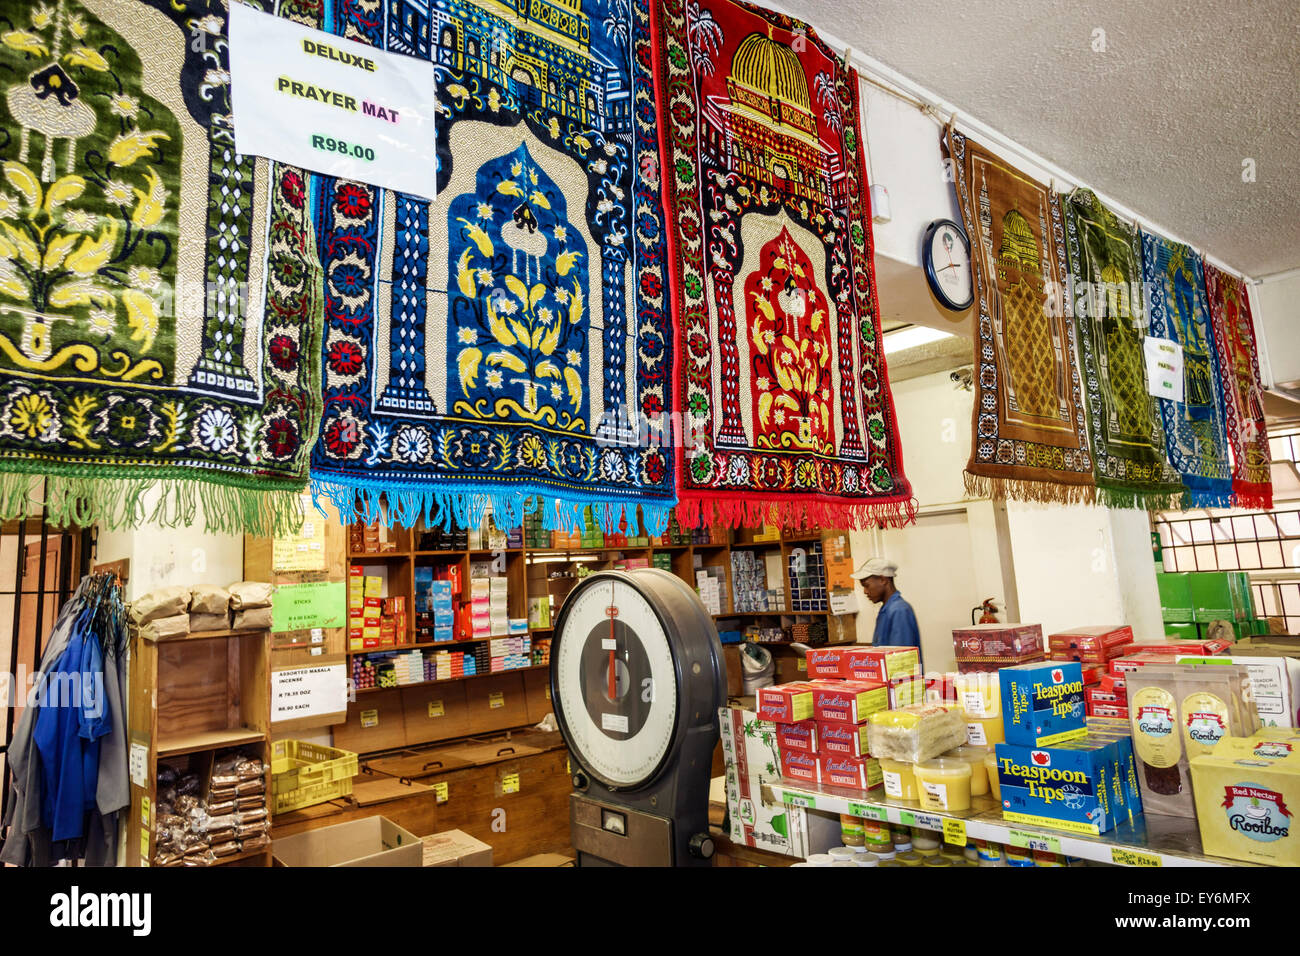 Cape Town South Africa,Bo-Kaap,Schotsche Kloof,Malay Quarter,Wale Street,Muslim,Atlas Trading Company,Indian spice shop,interior inside,counter,prayer Stock Photo